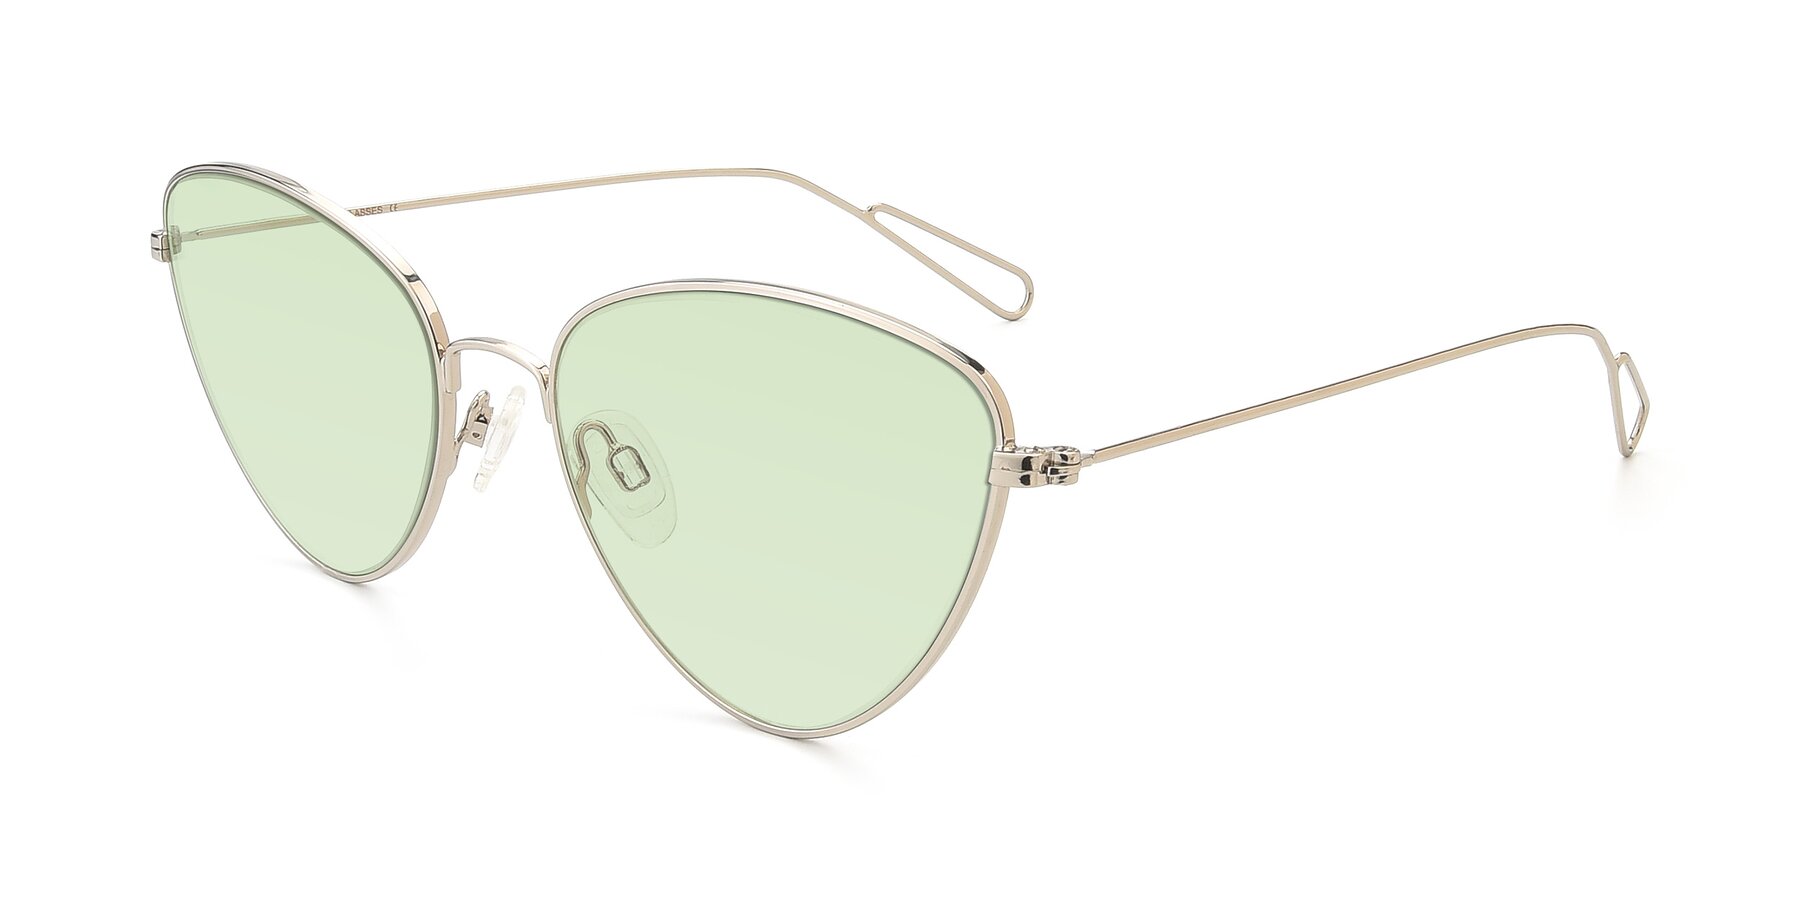 Angle of Butterfly Effect in Silver with Light Green Tinted Lenses